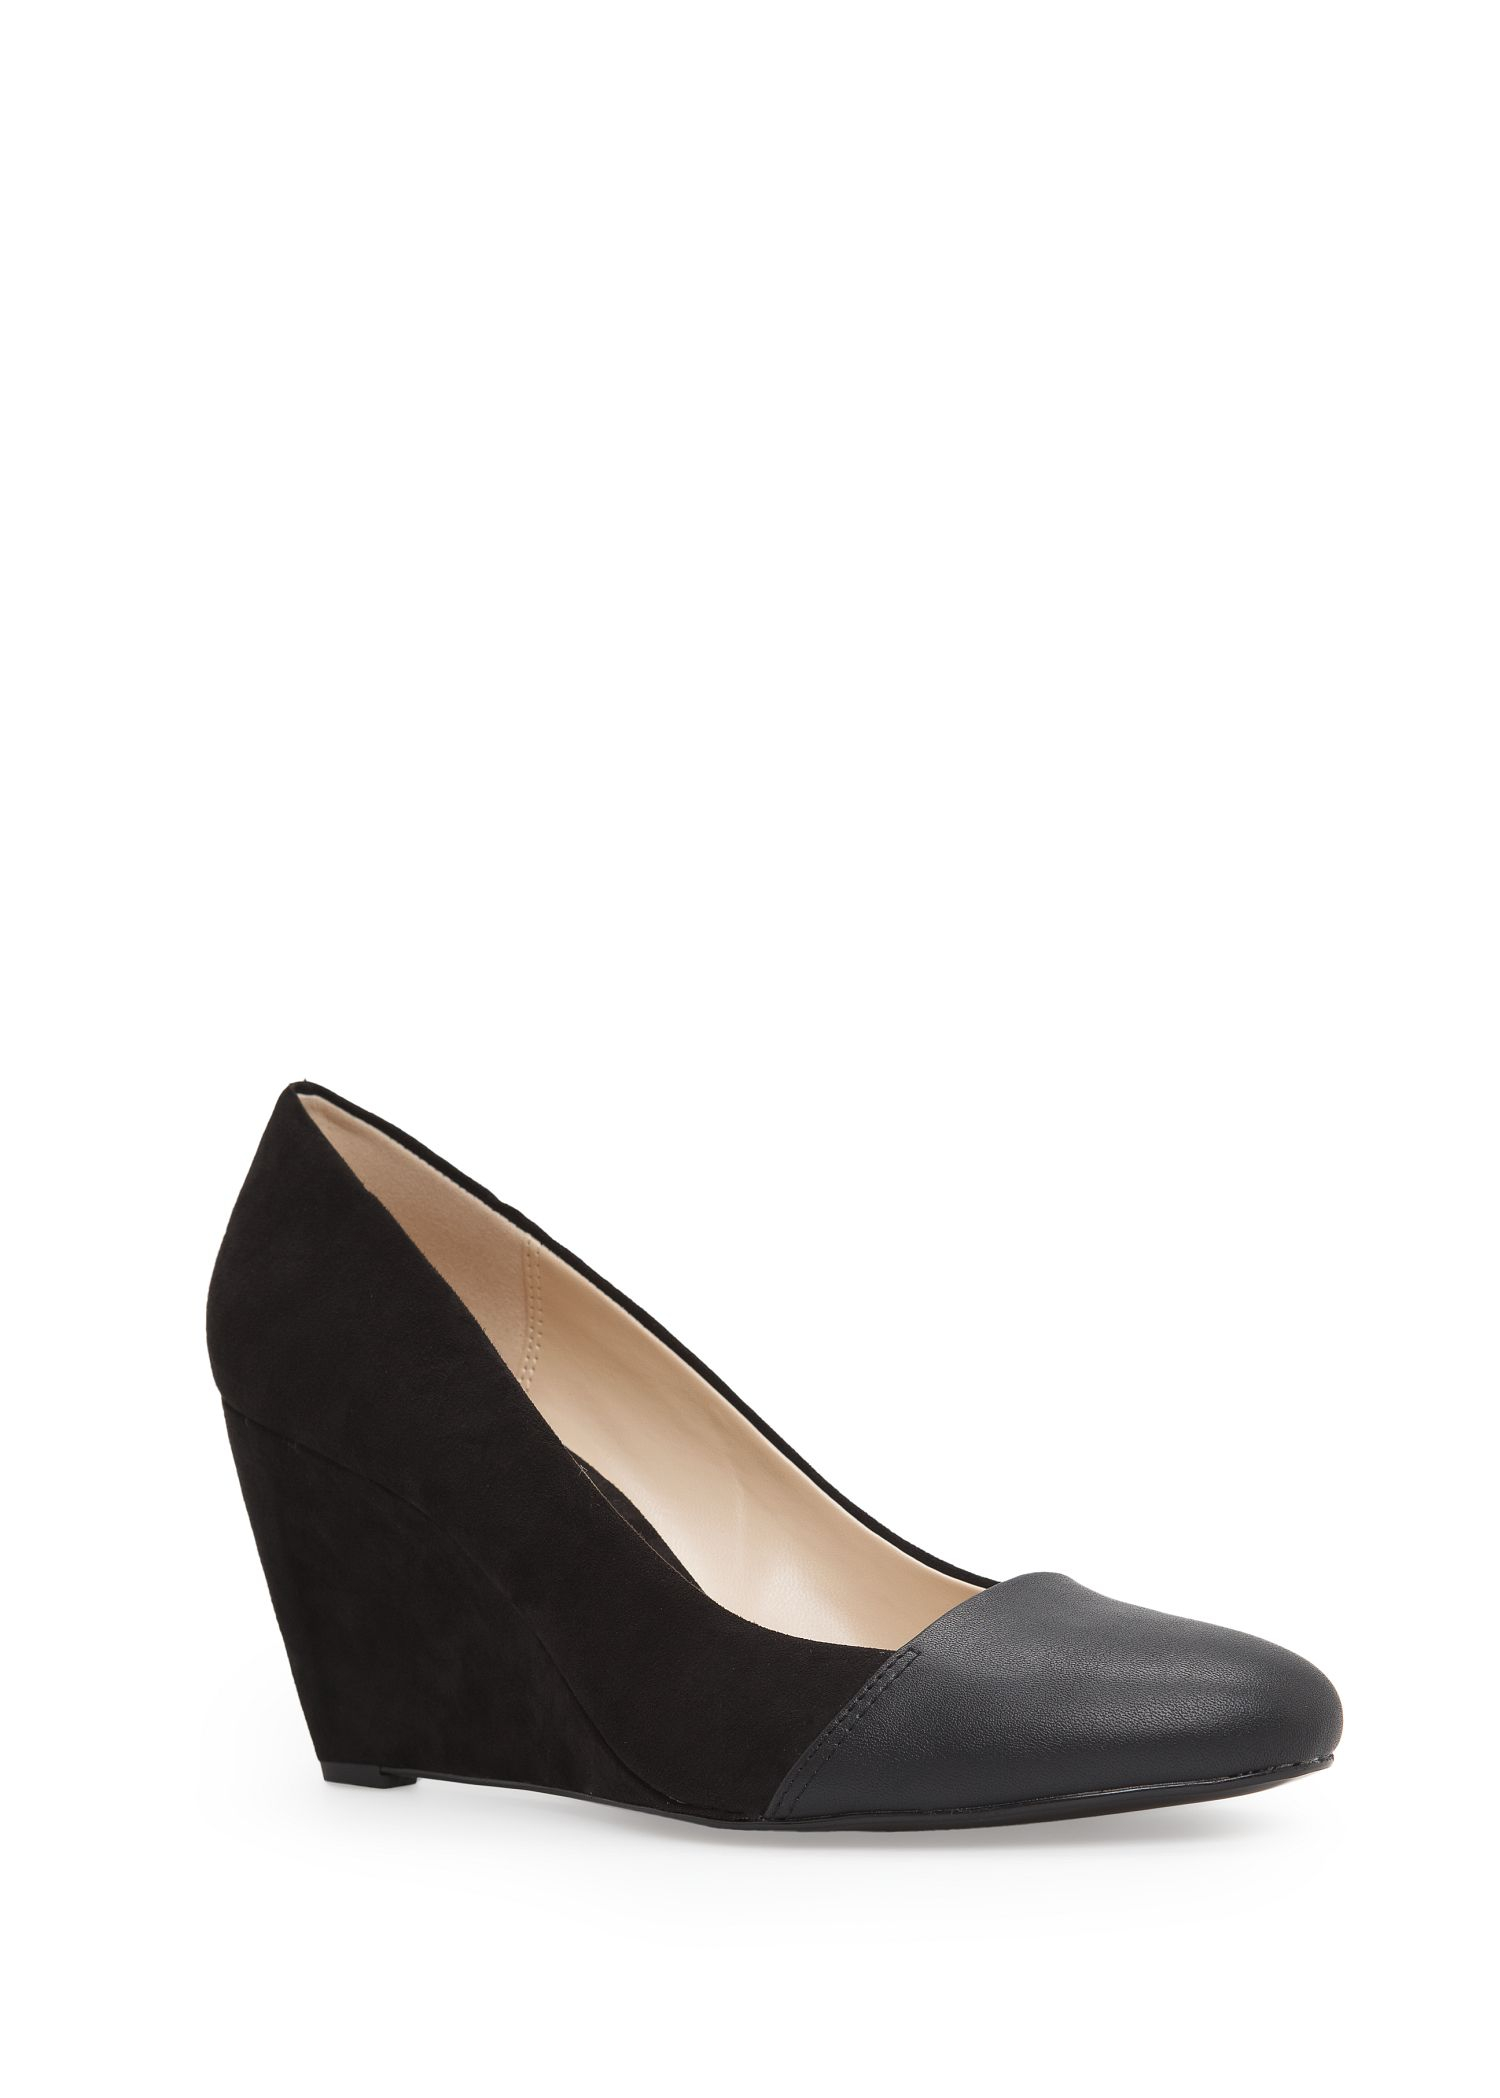 Lyst - Mango Faux Suede Wedge Shoes in Black